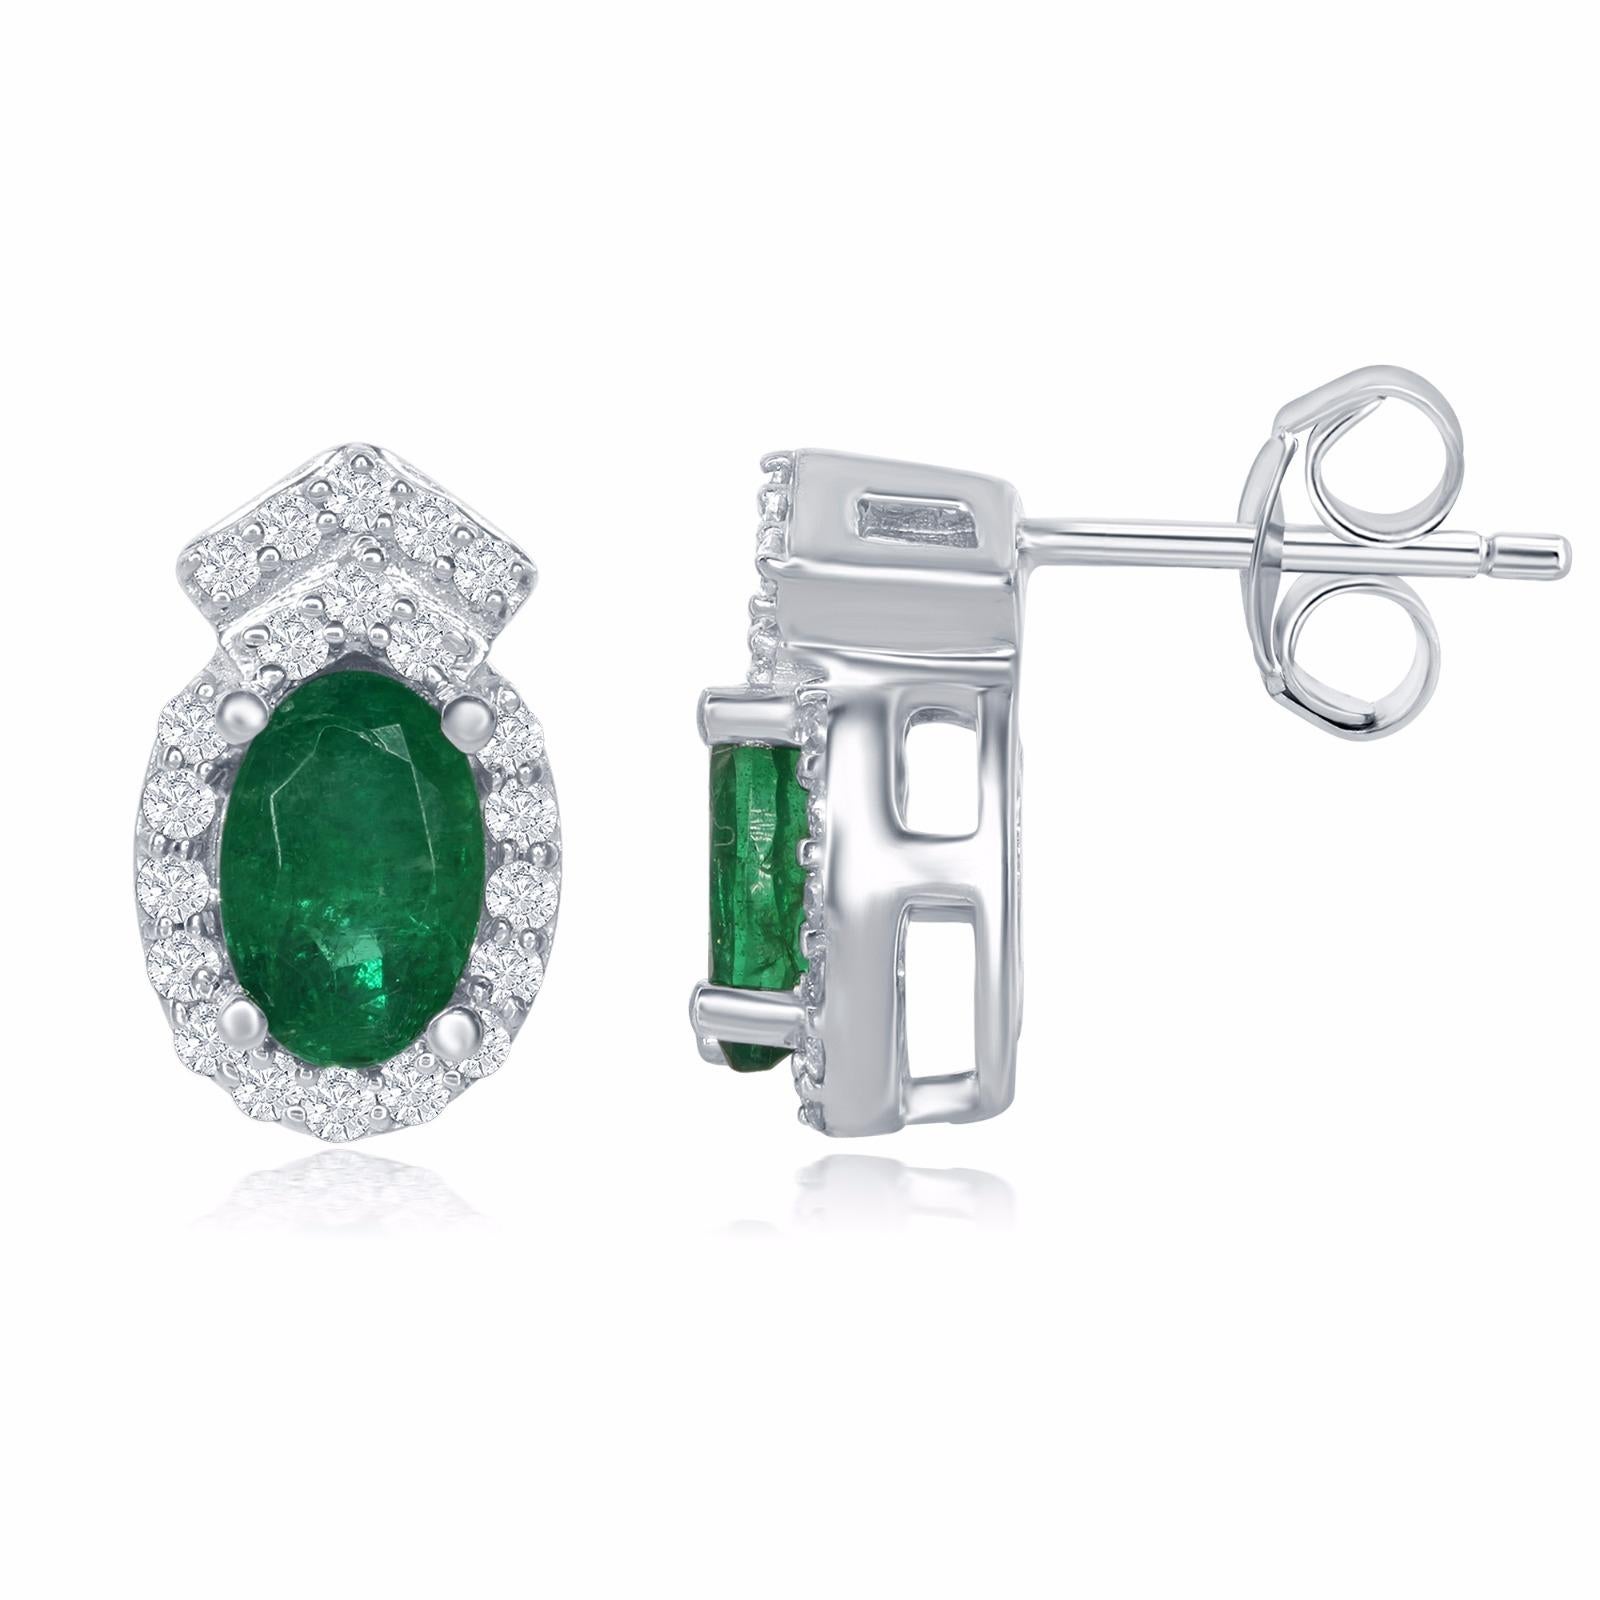 Oval Cut Emerald and Diamond White Gold Drop Earring Studs